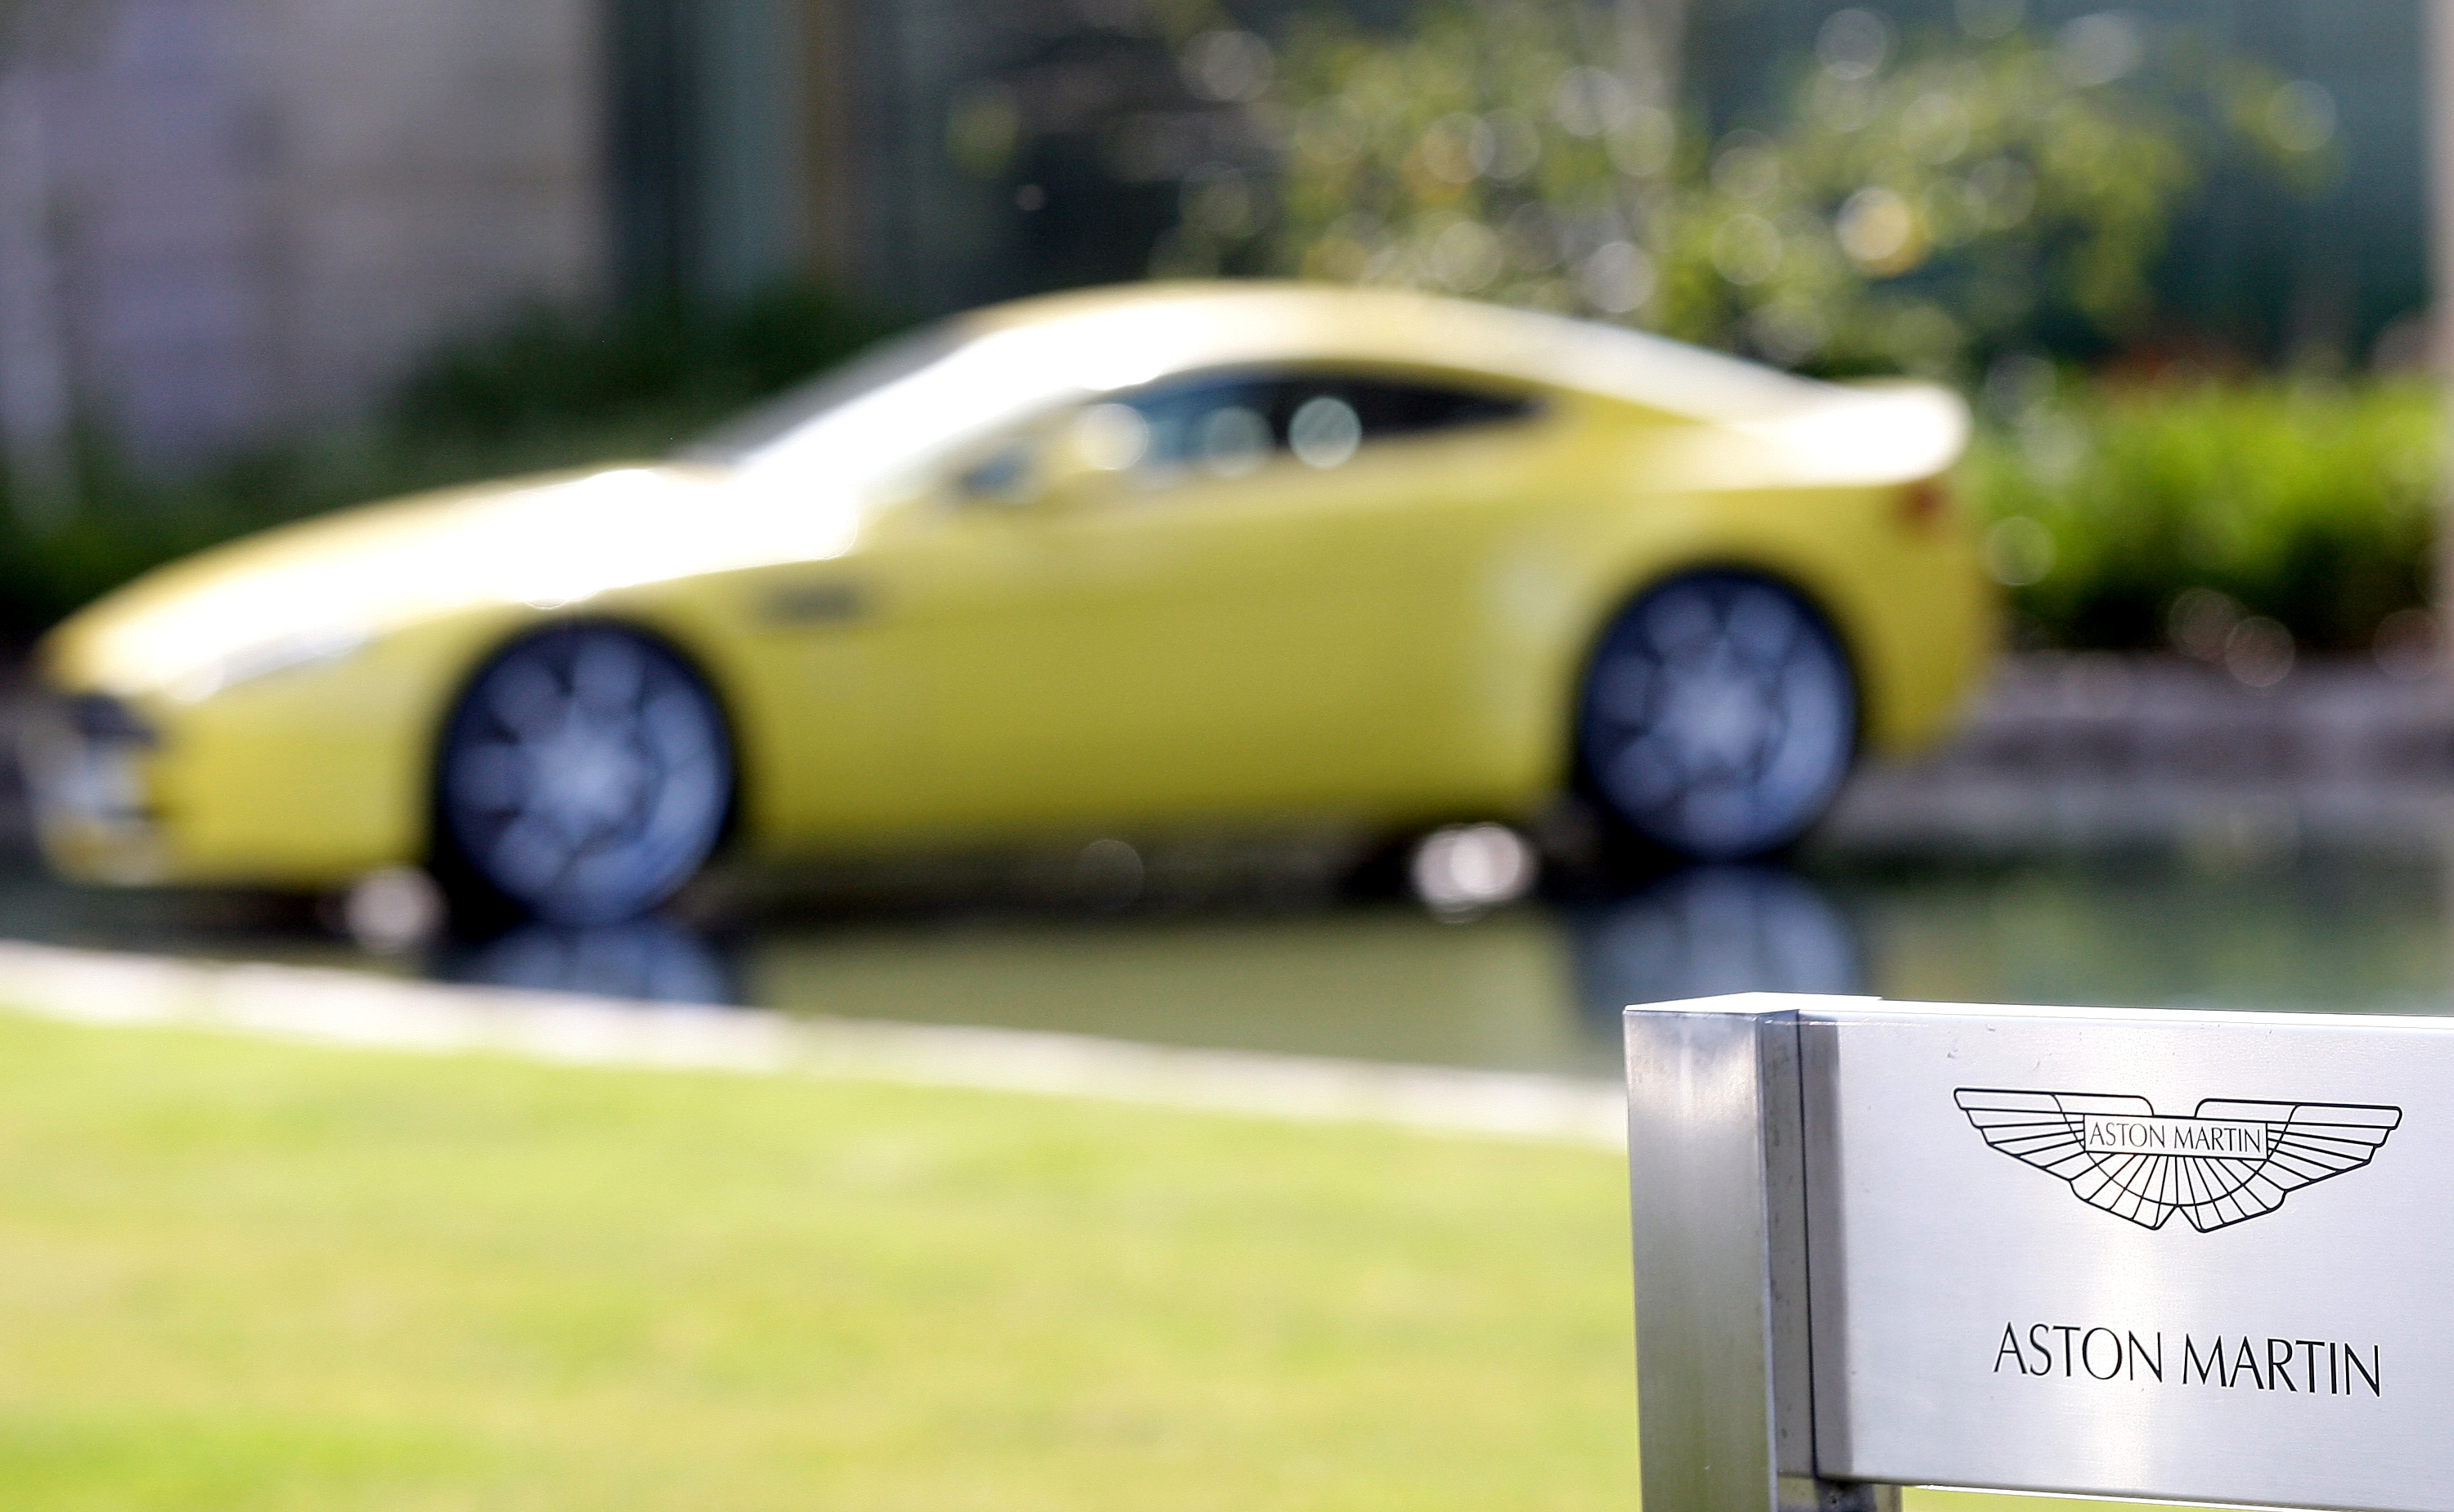 The Real Cost of a Used $45,000 Aston Martin